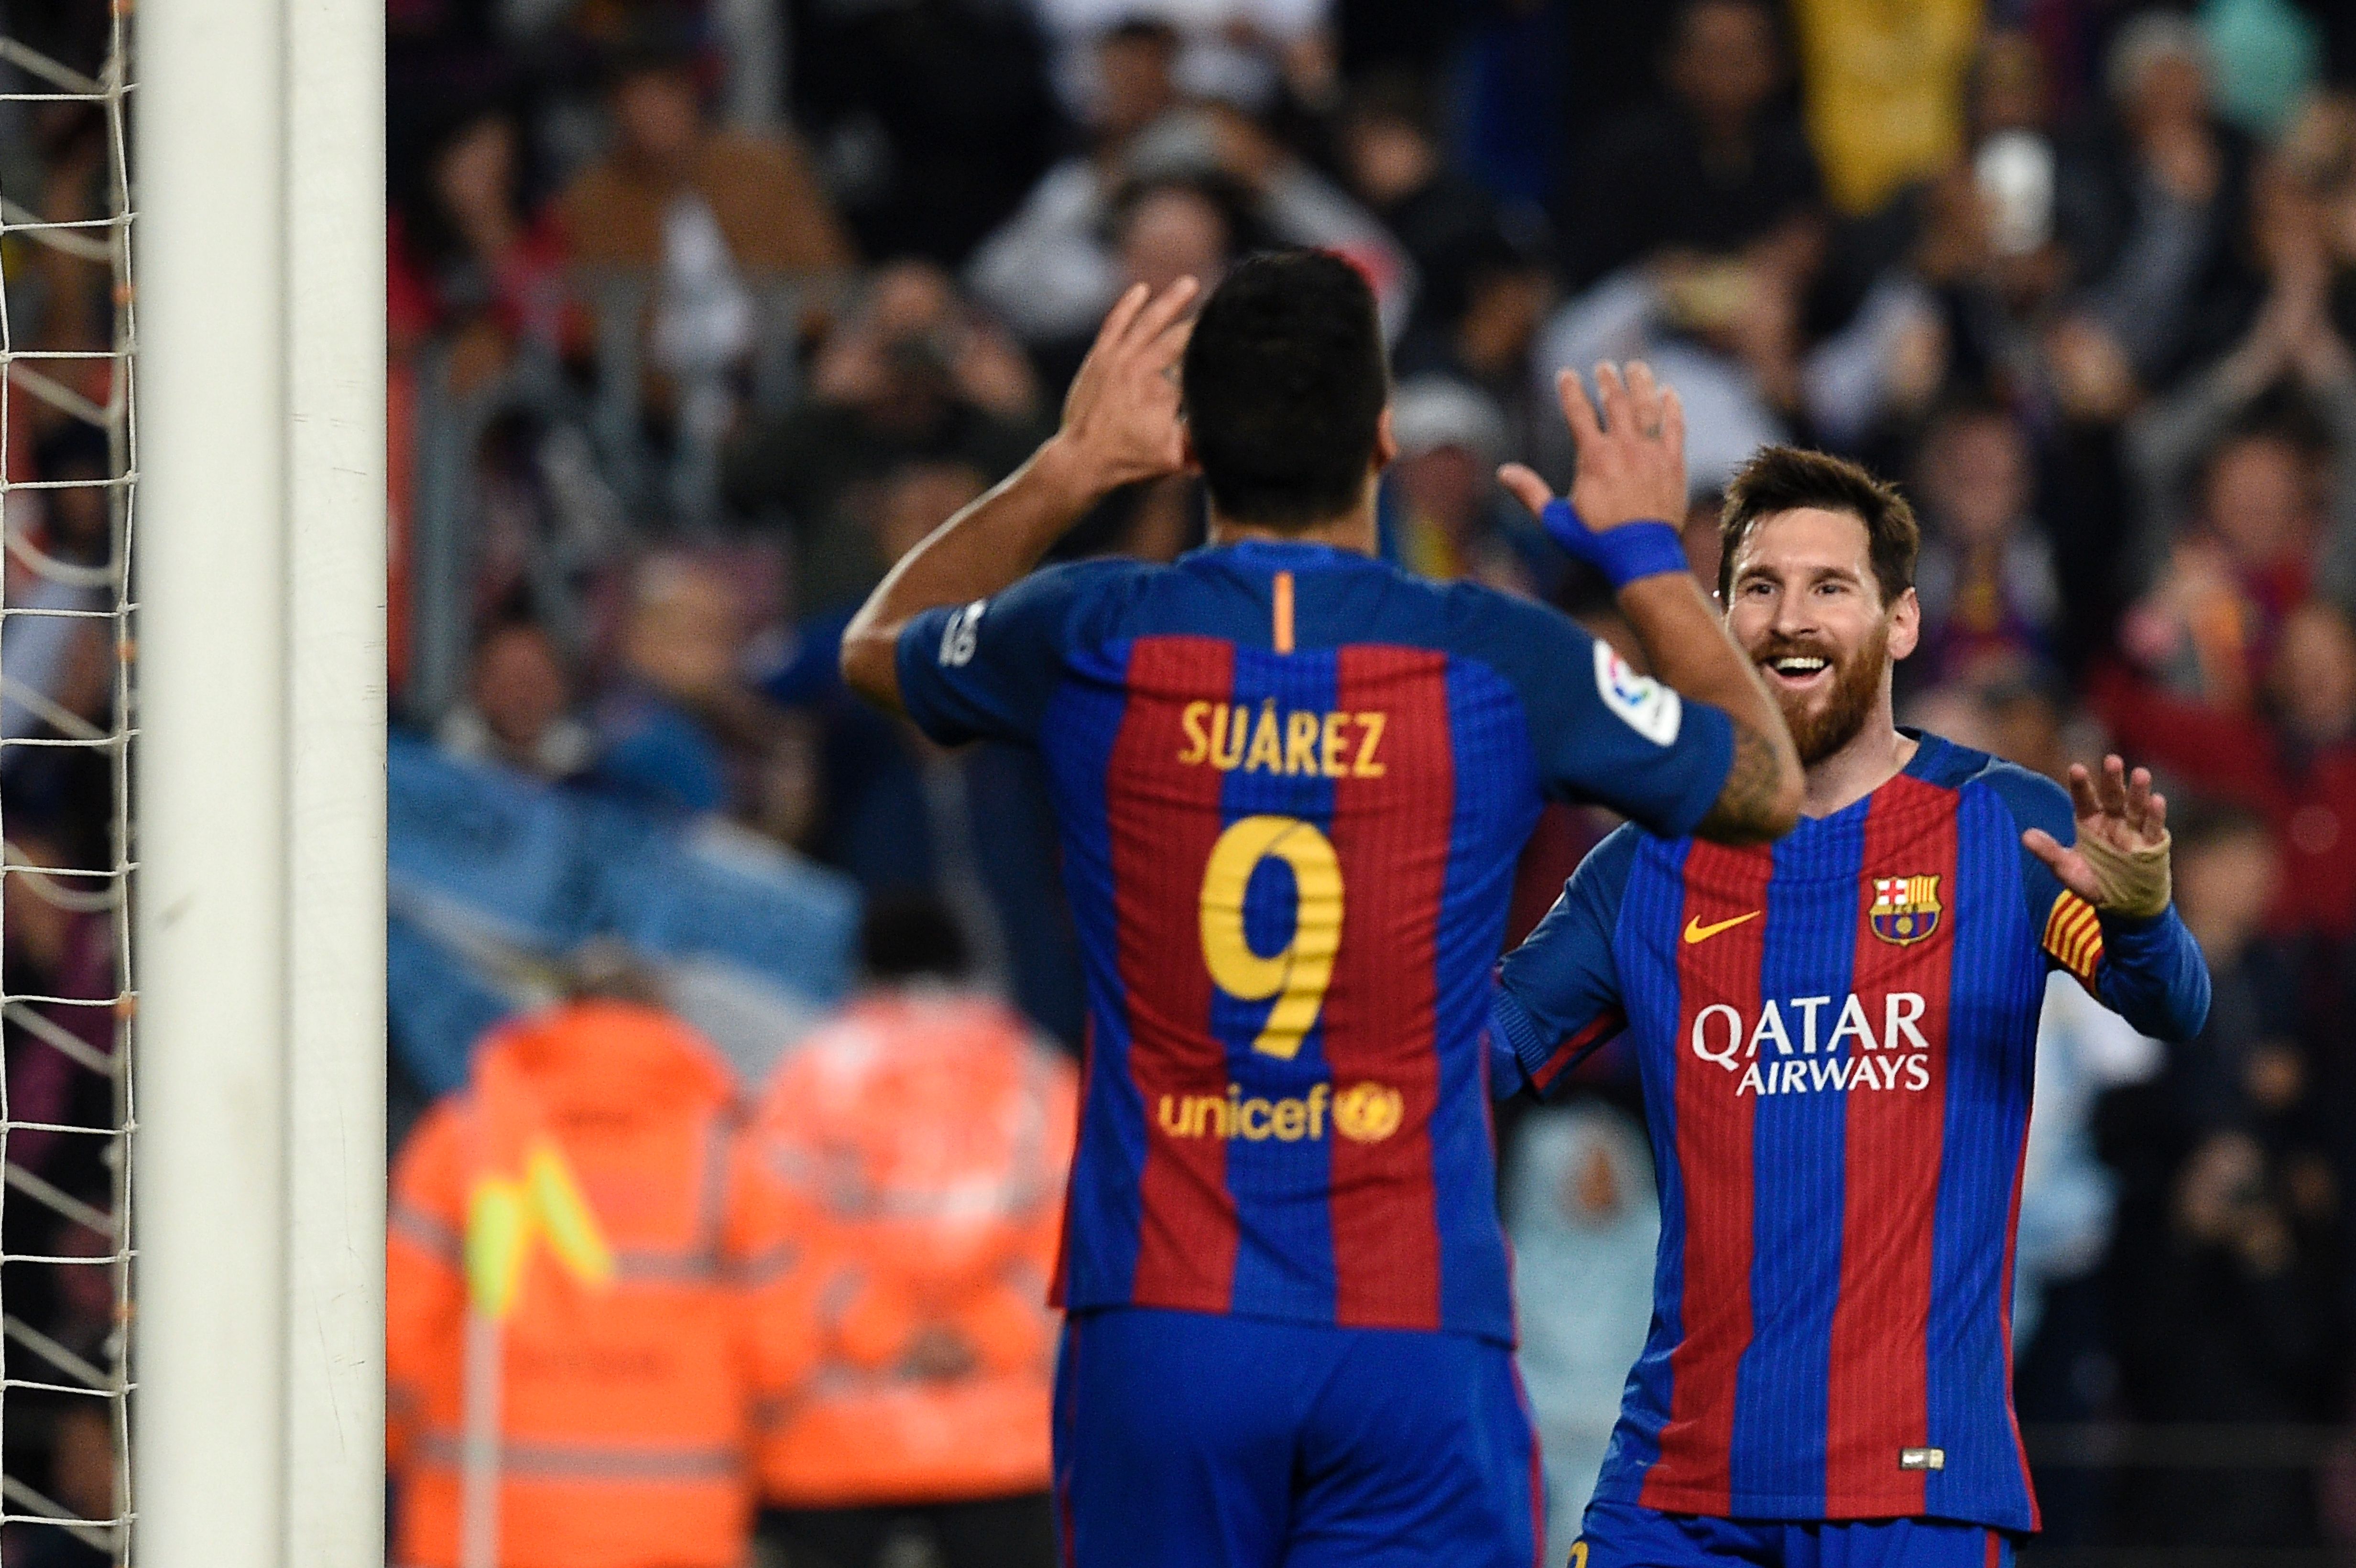 Barcelona's Argentinian forward Lionel Messi (R) celebrates with Barcelona's Uruguayan forward Luis Suarez after scoring a goal during the Spanish league football match FC Barcelona vs Real Sociedad at the Camp Nou stadium in Barcelona on April 15, 2017. / AFP PHOTO / LLUIS GENE        (Photo credit should read LLUIS GENE/AFP/Getty Images)